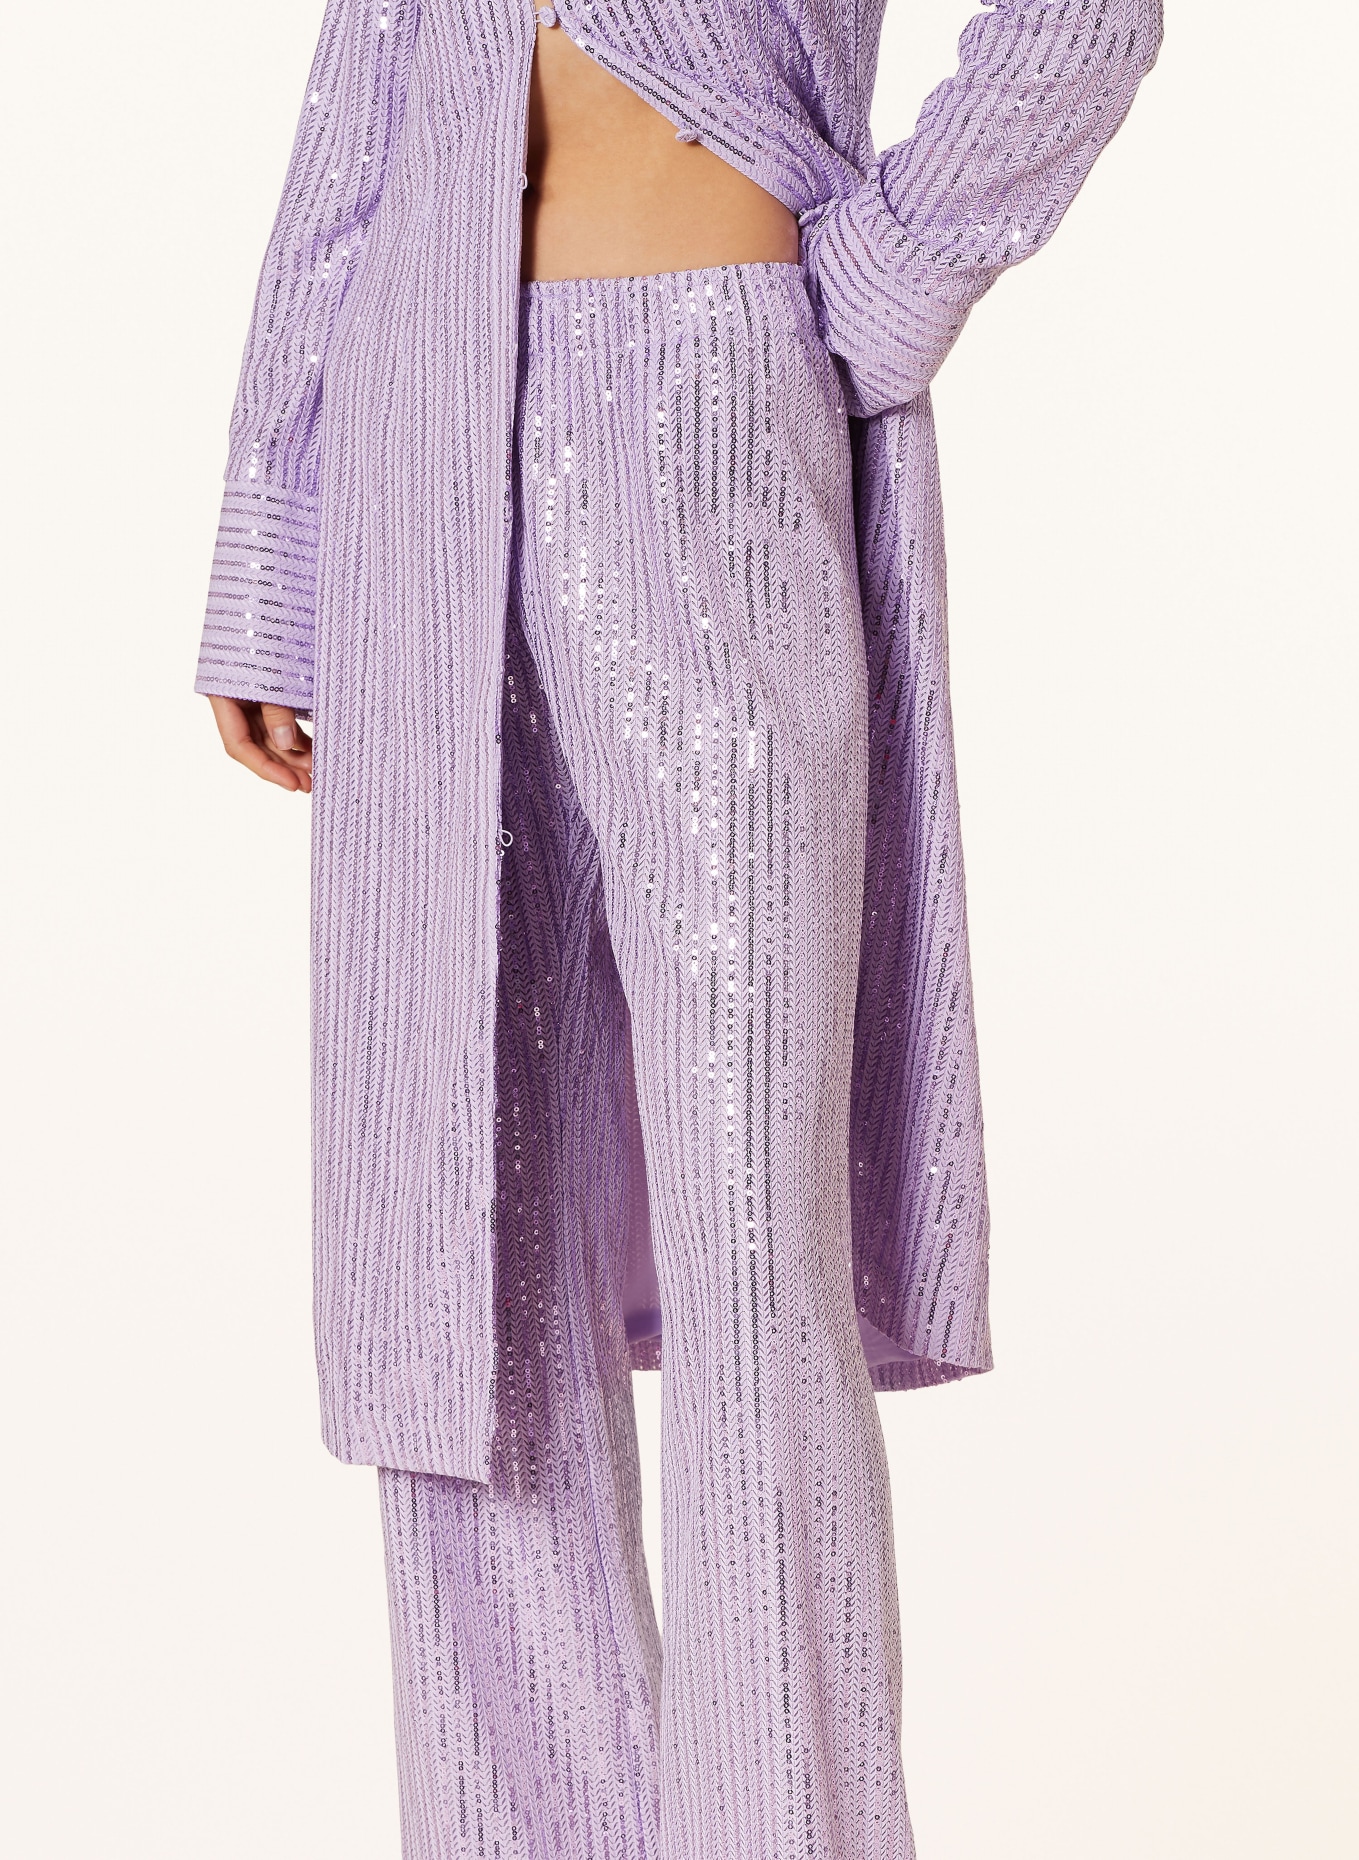 STINE GOYA Trousers MARKUS with sequins, Color: LAVENDER (Image 5)